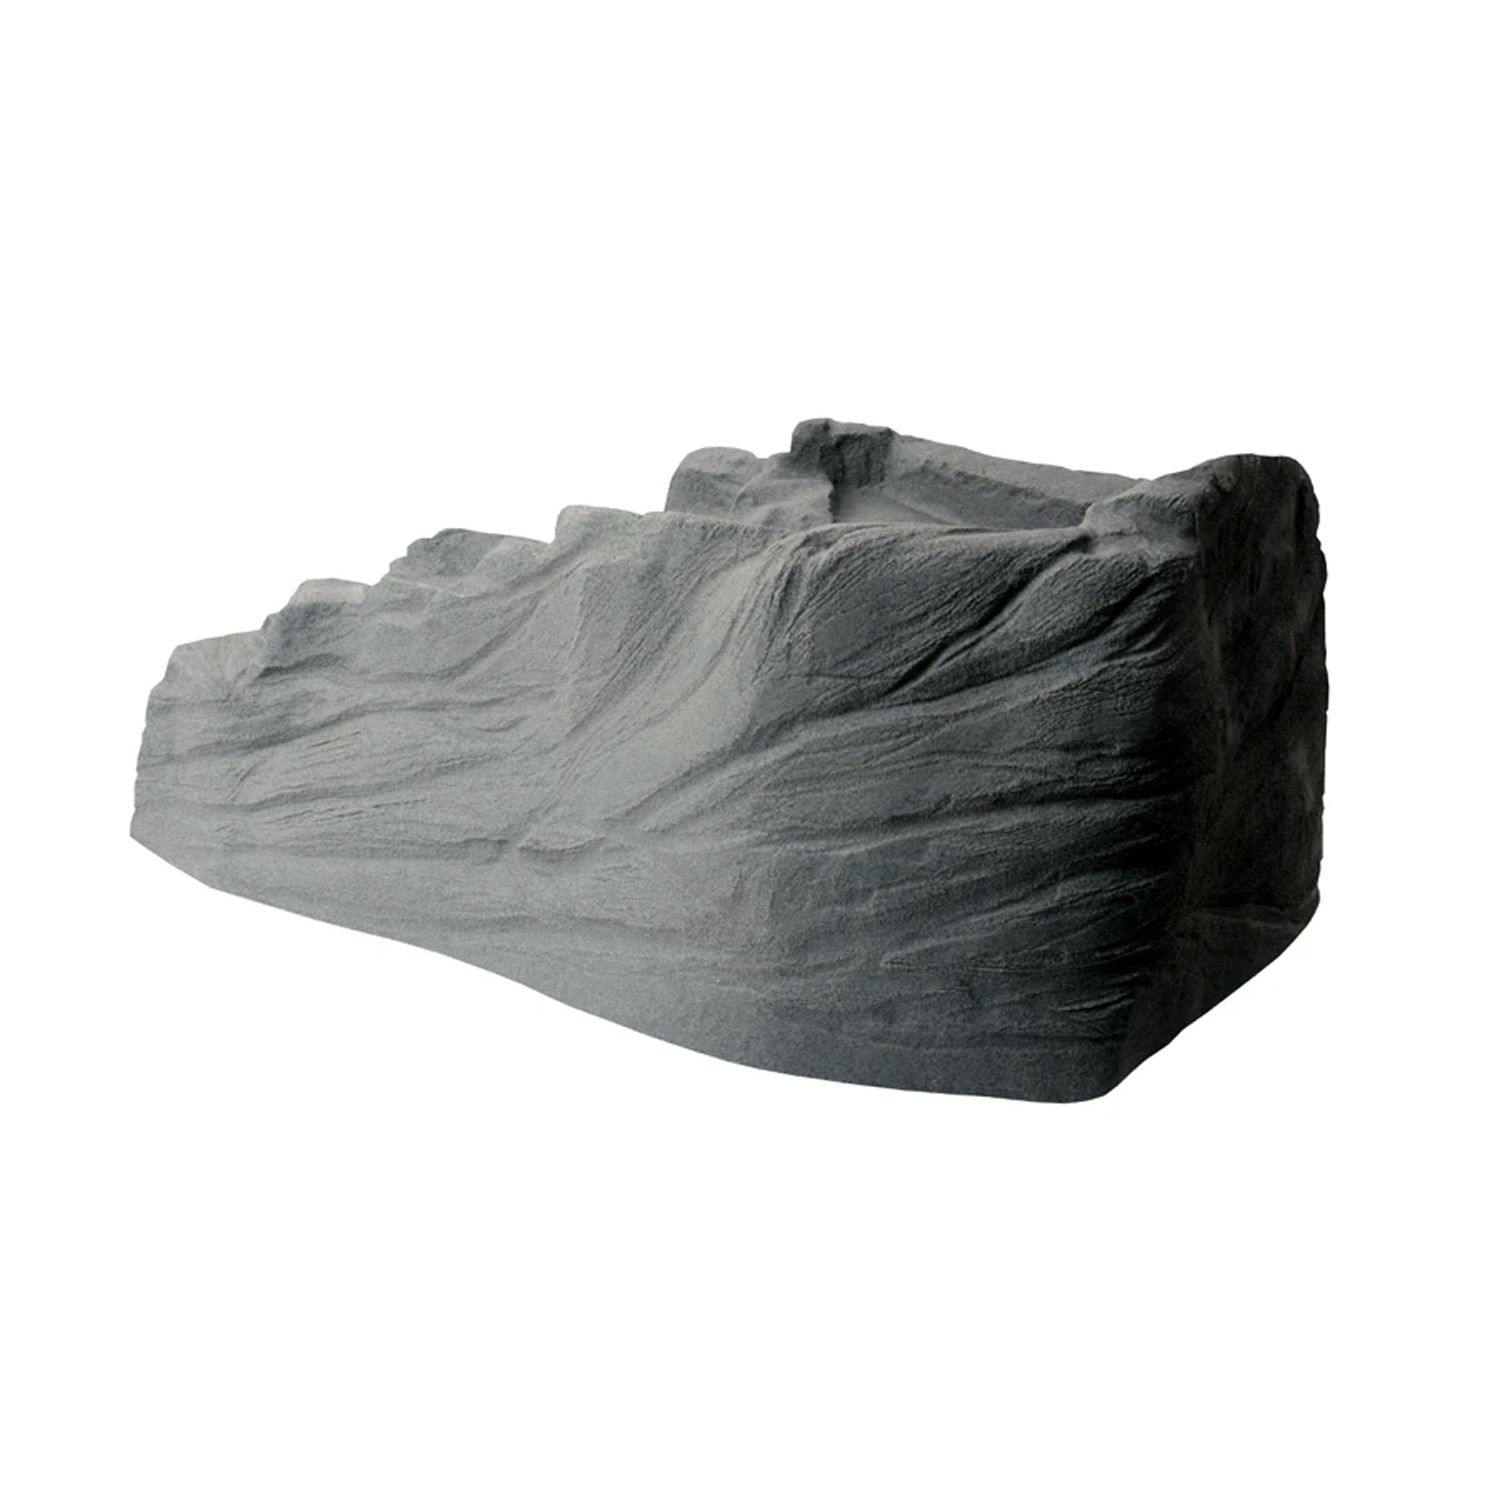 Algreen Decorative Pond Watercoarse, Tranquility Waterfall with Threaded Fitting, Charcoalstone - image 5 of 5